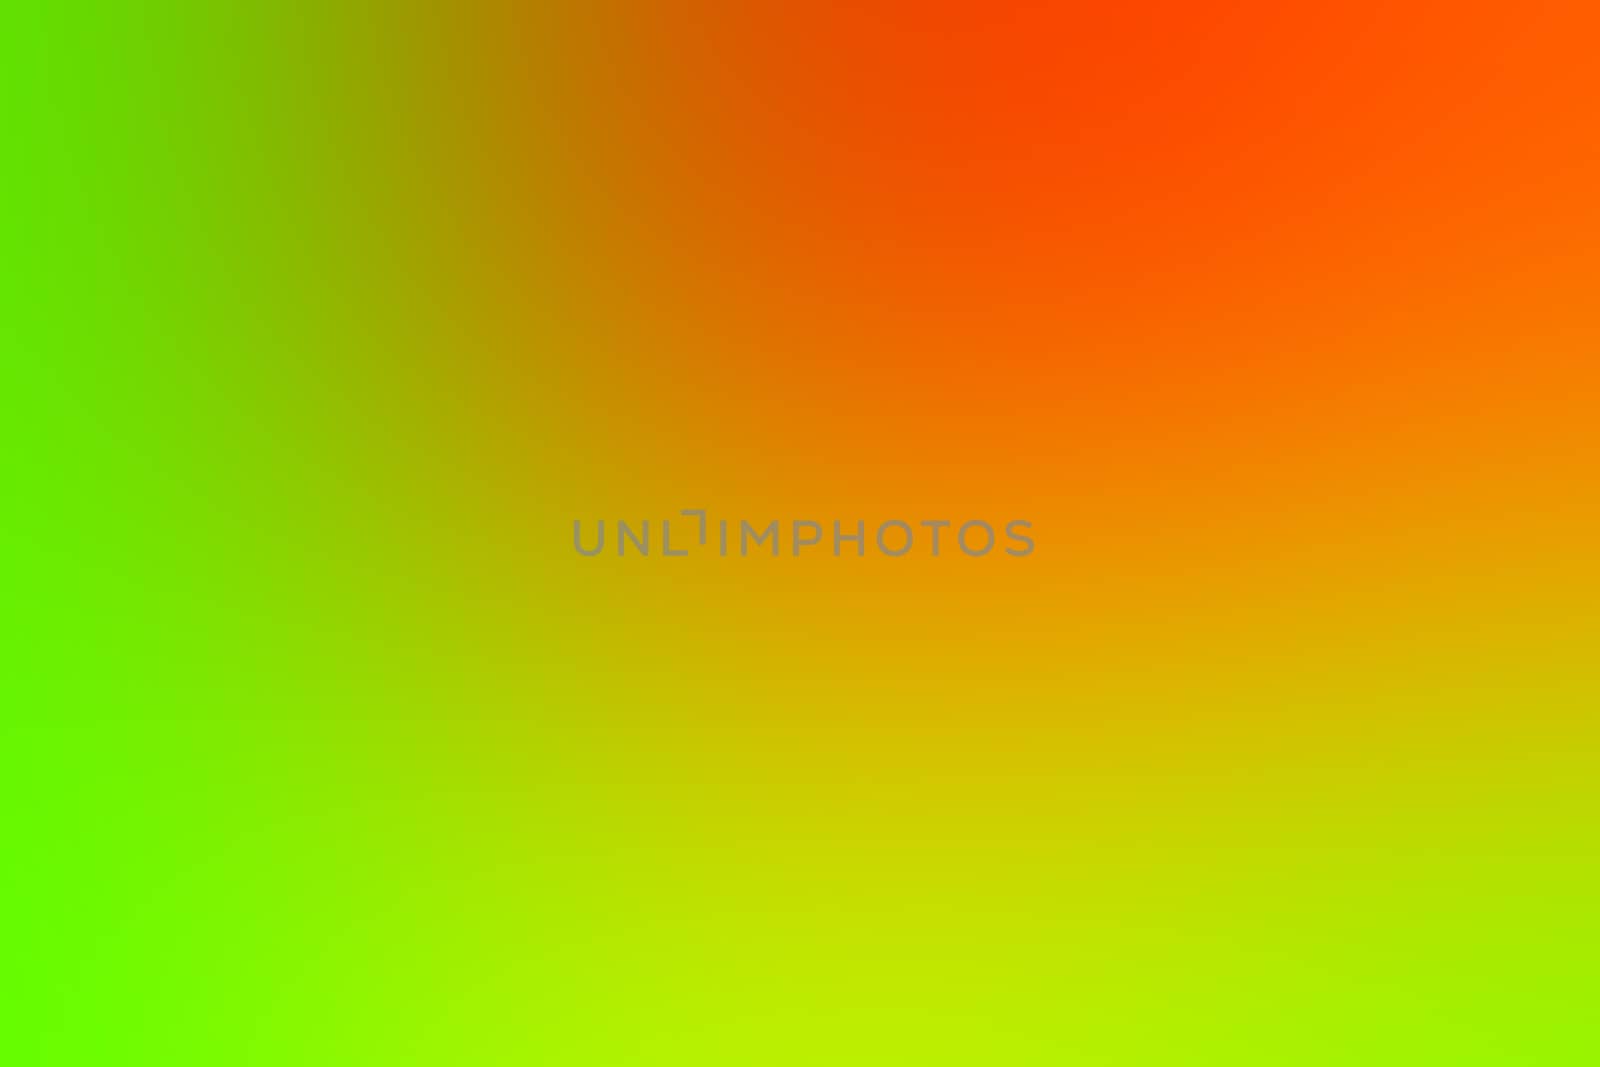 blurred soft green and red gradient colorful light shade background by cgdeaw